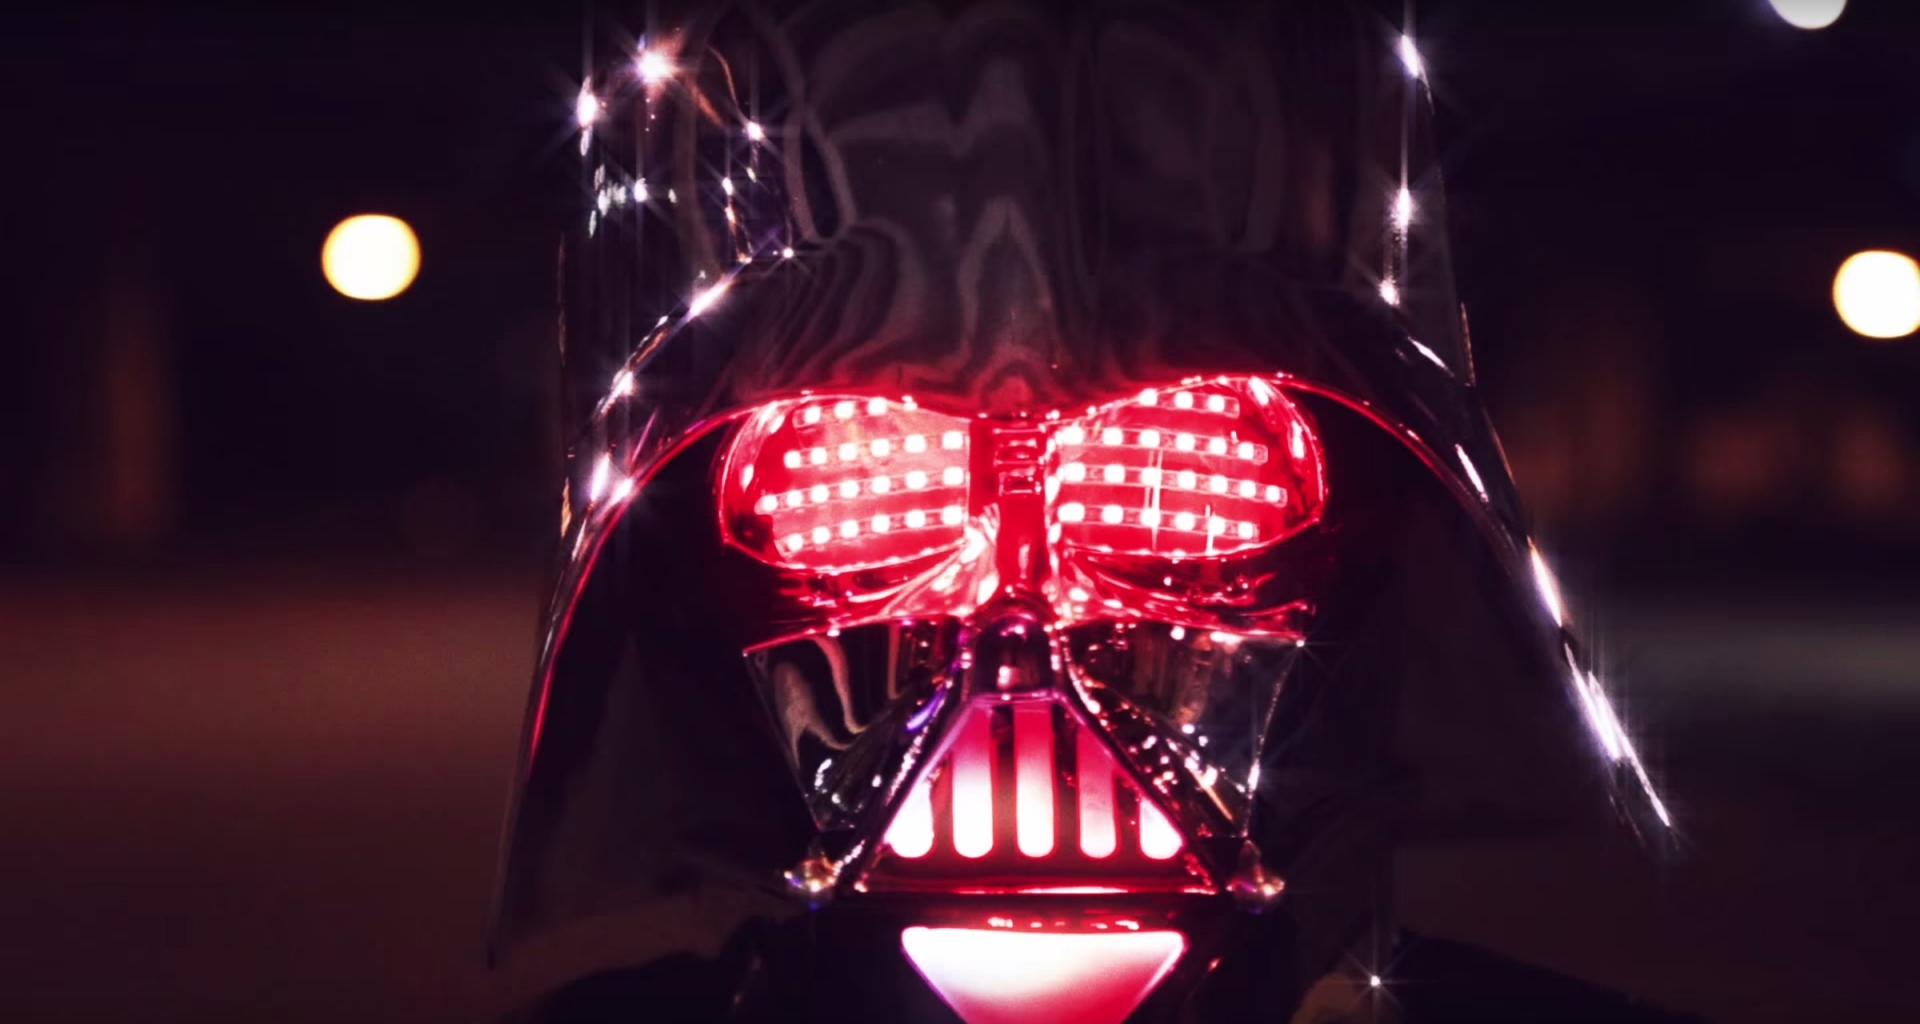 Star Wars: Did Daft Punk Do A Song For The Force Awakens?